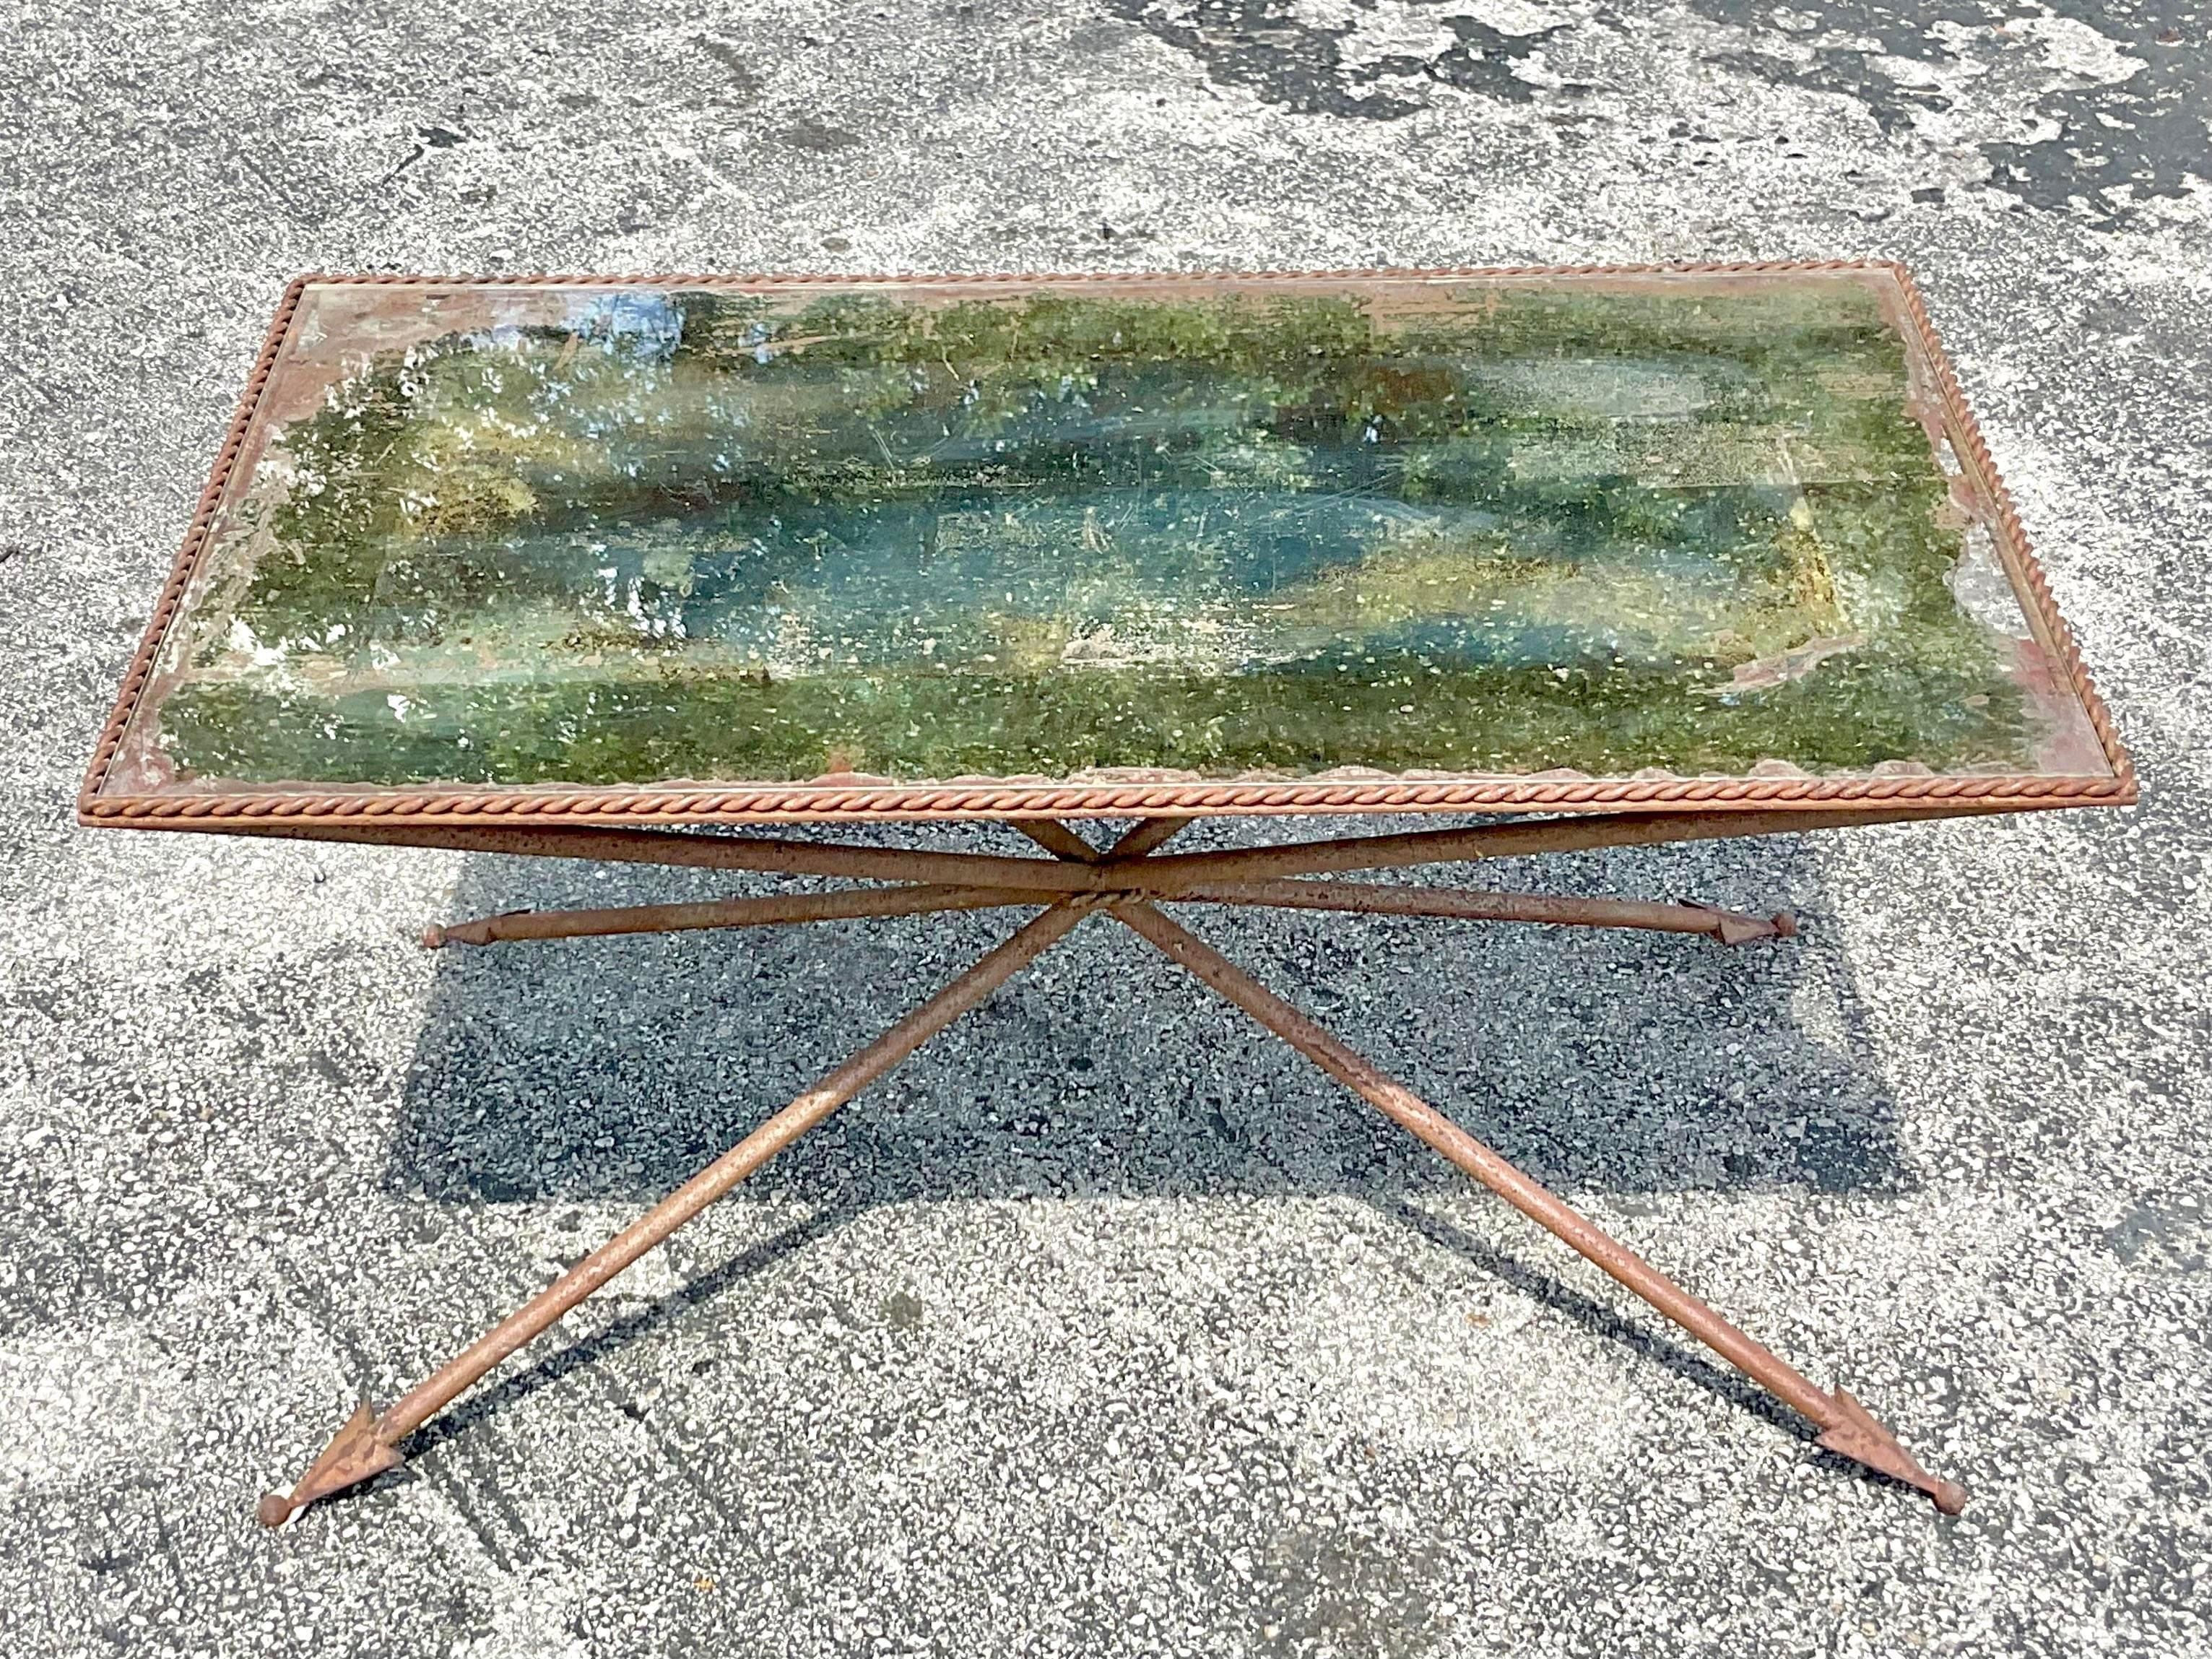 An exceptional vintage Regency coffee table. A brilliant Directorie style table with an all over patinated finish. Beautiful distressed inset mirrored top and arrow legs. Acquired from a Palm Beach estate.